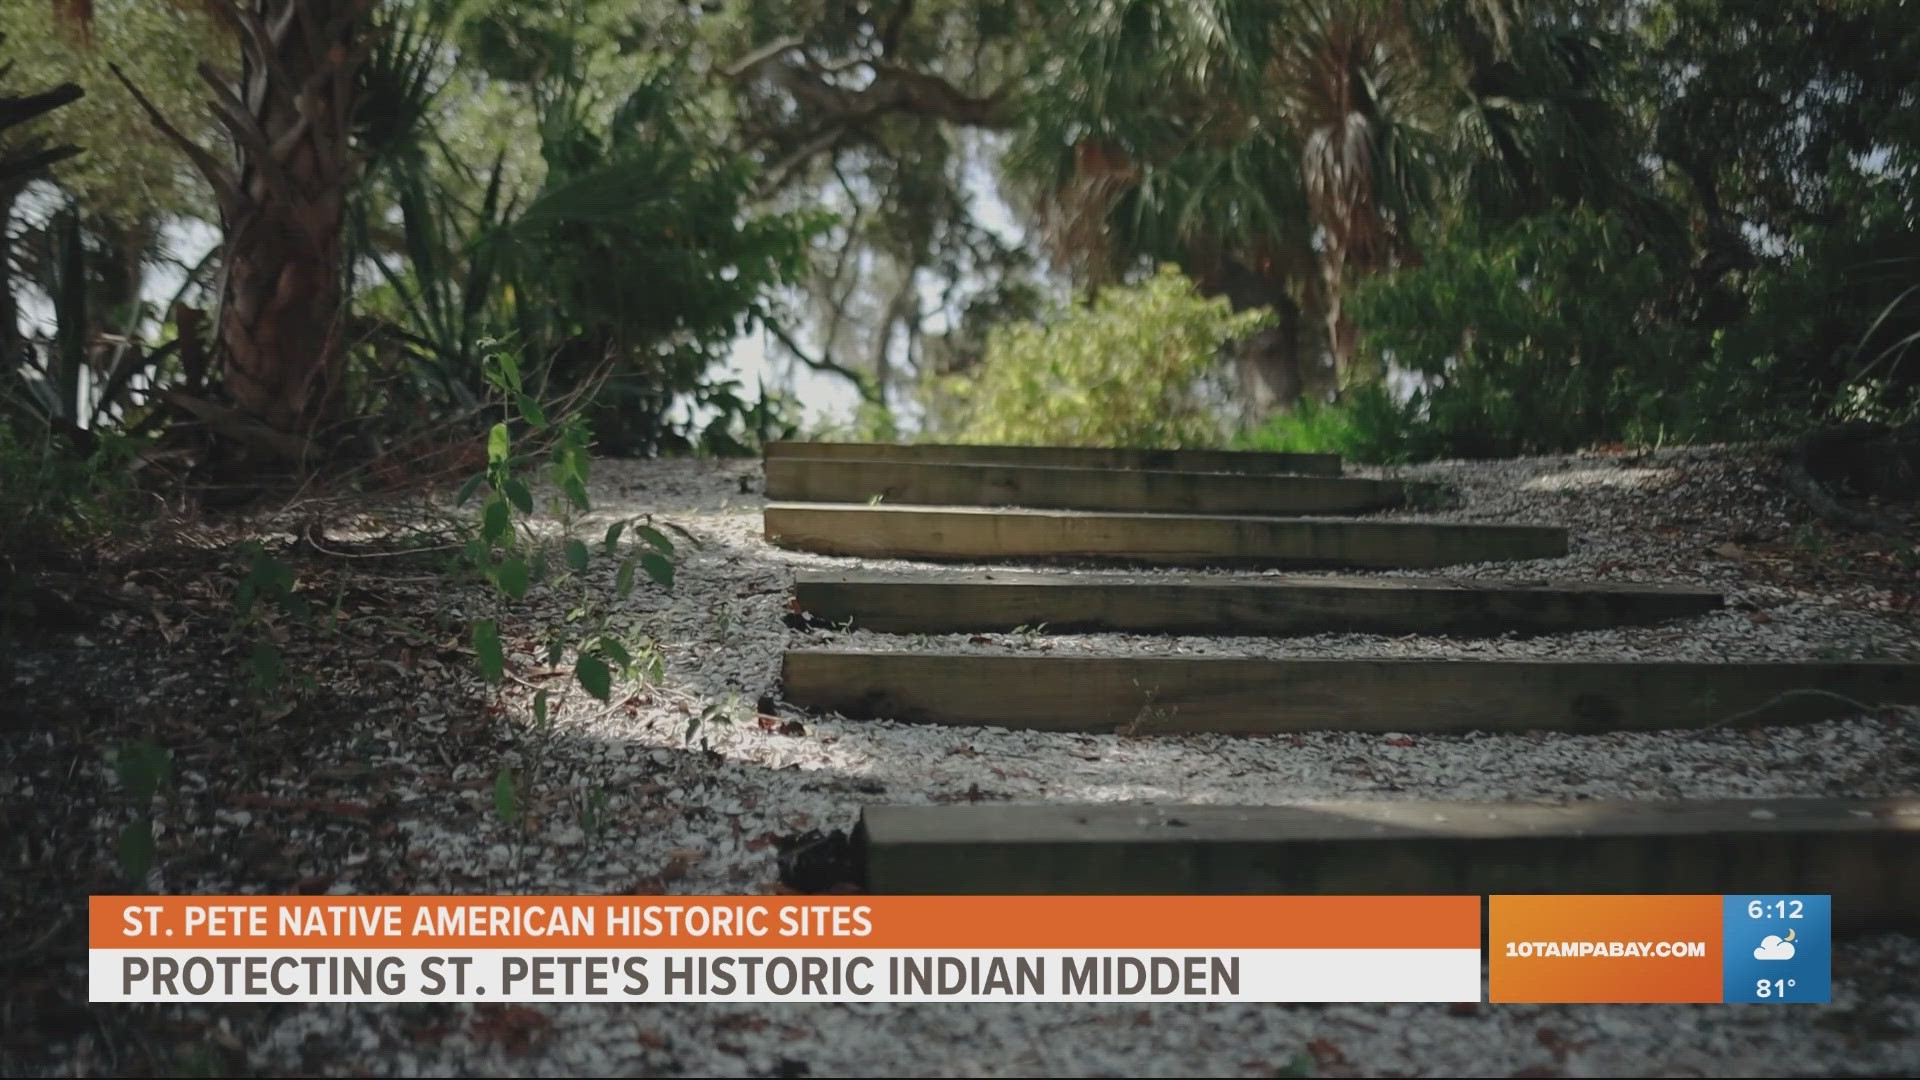 Indian Mound Park features historic native sites worth protecting and preserving. Here's a look at middens, which were believed to be important to the community.